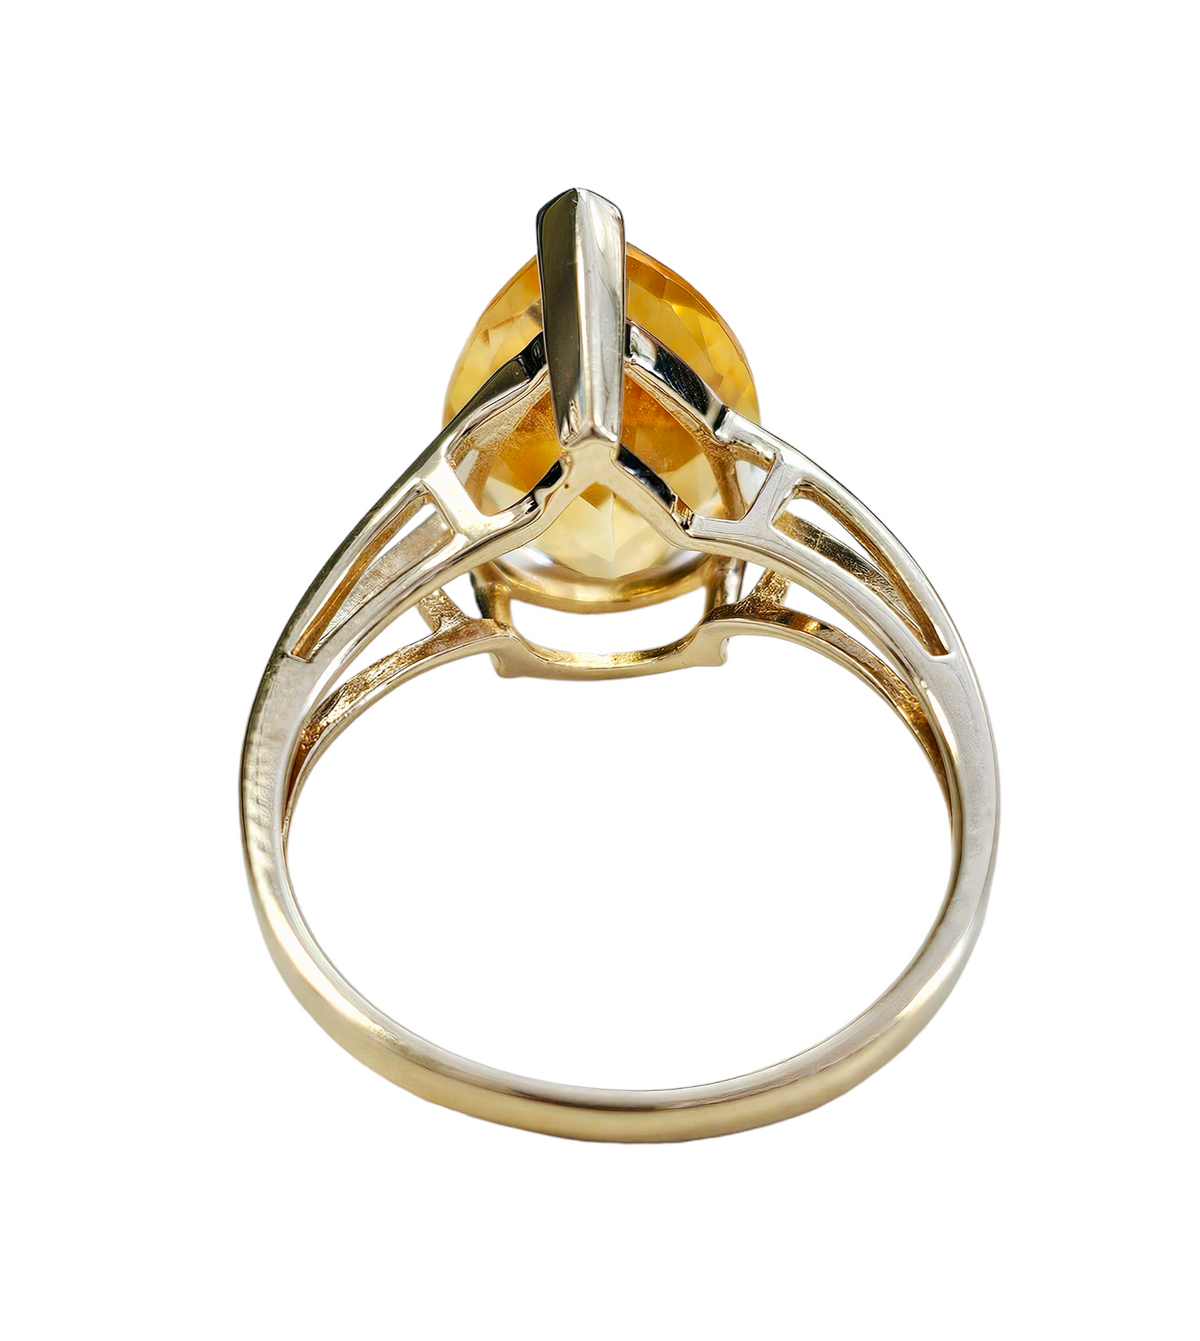 Pear-Shaped Citrine Solitaire Ring with Split Shank made in 10-Karat Yellow Gold